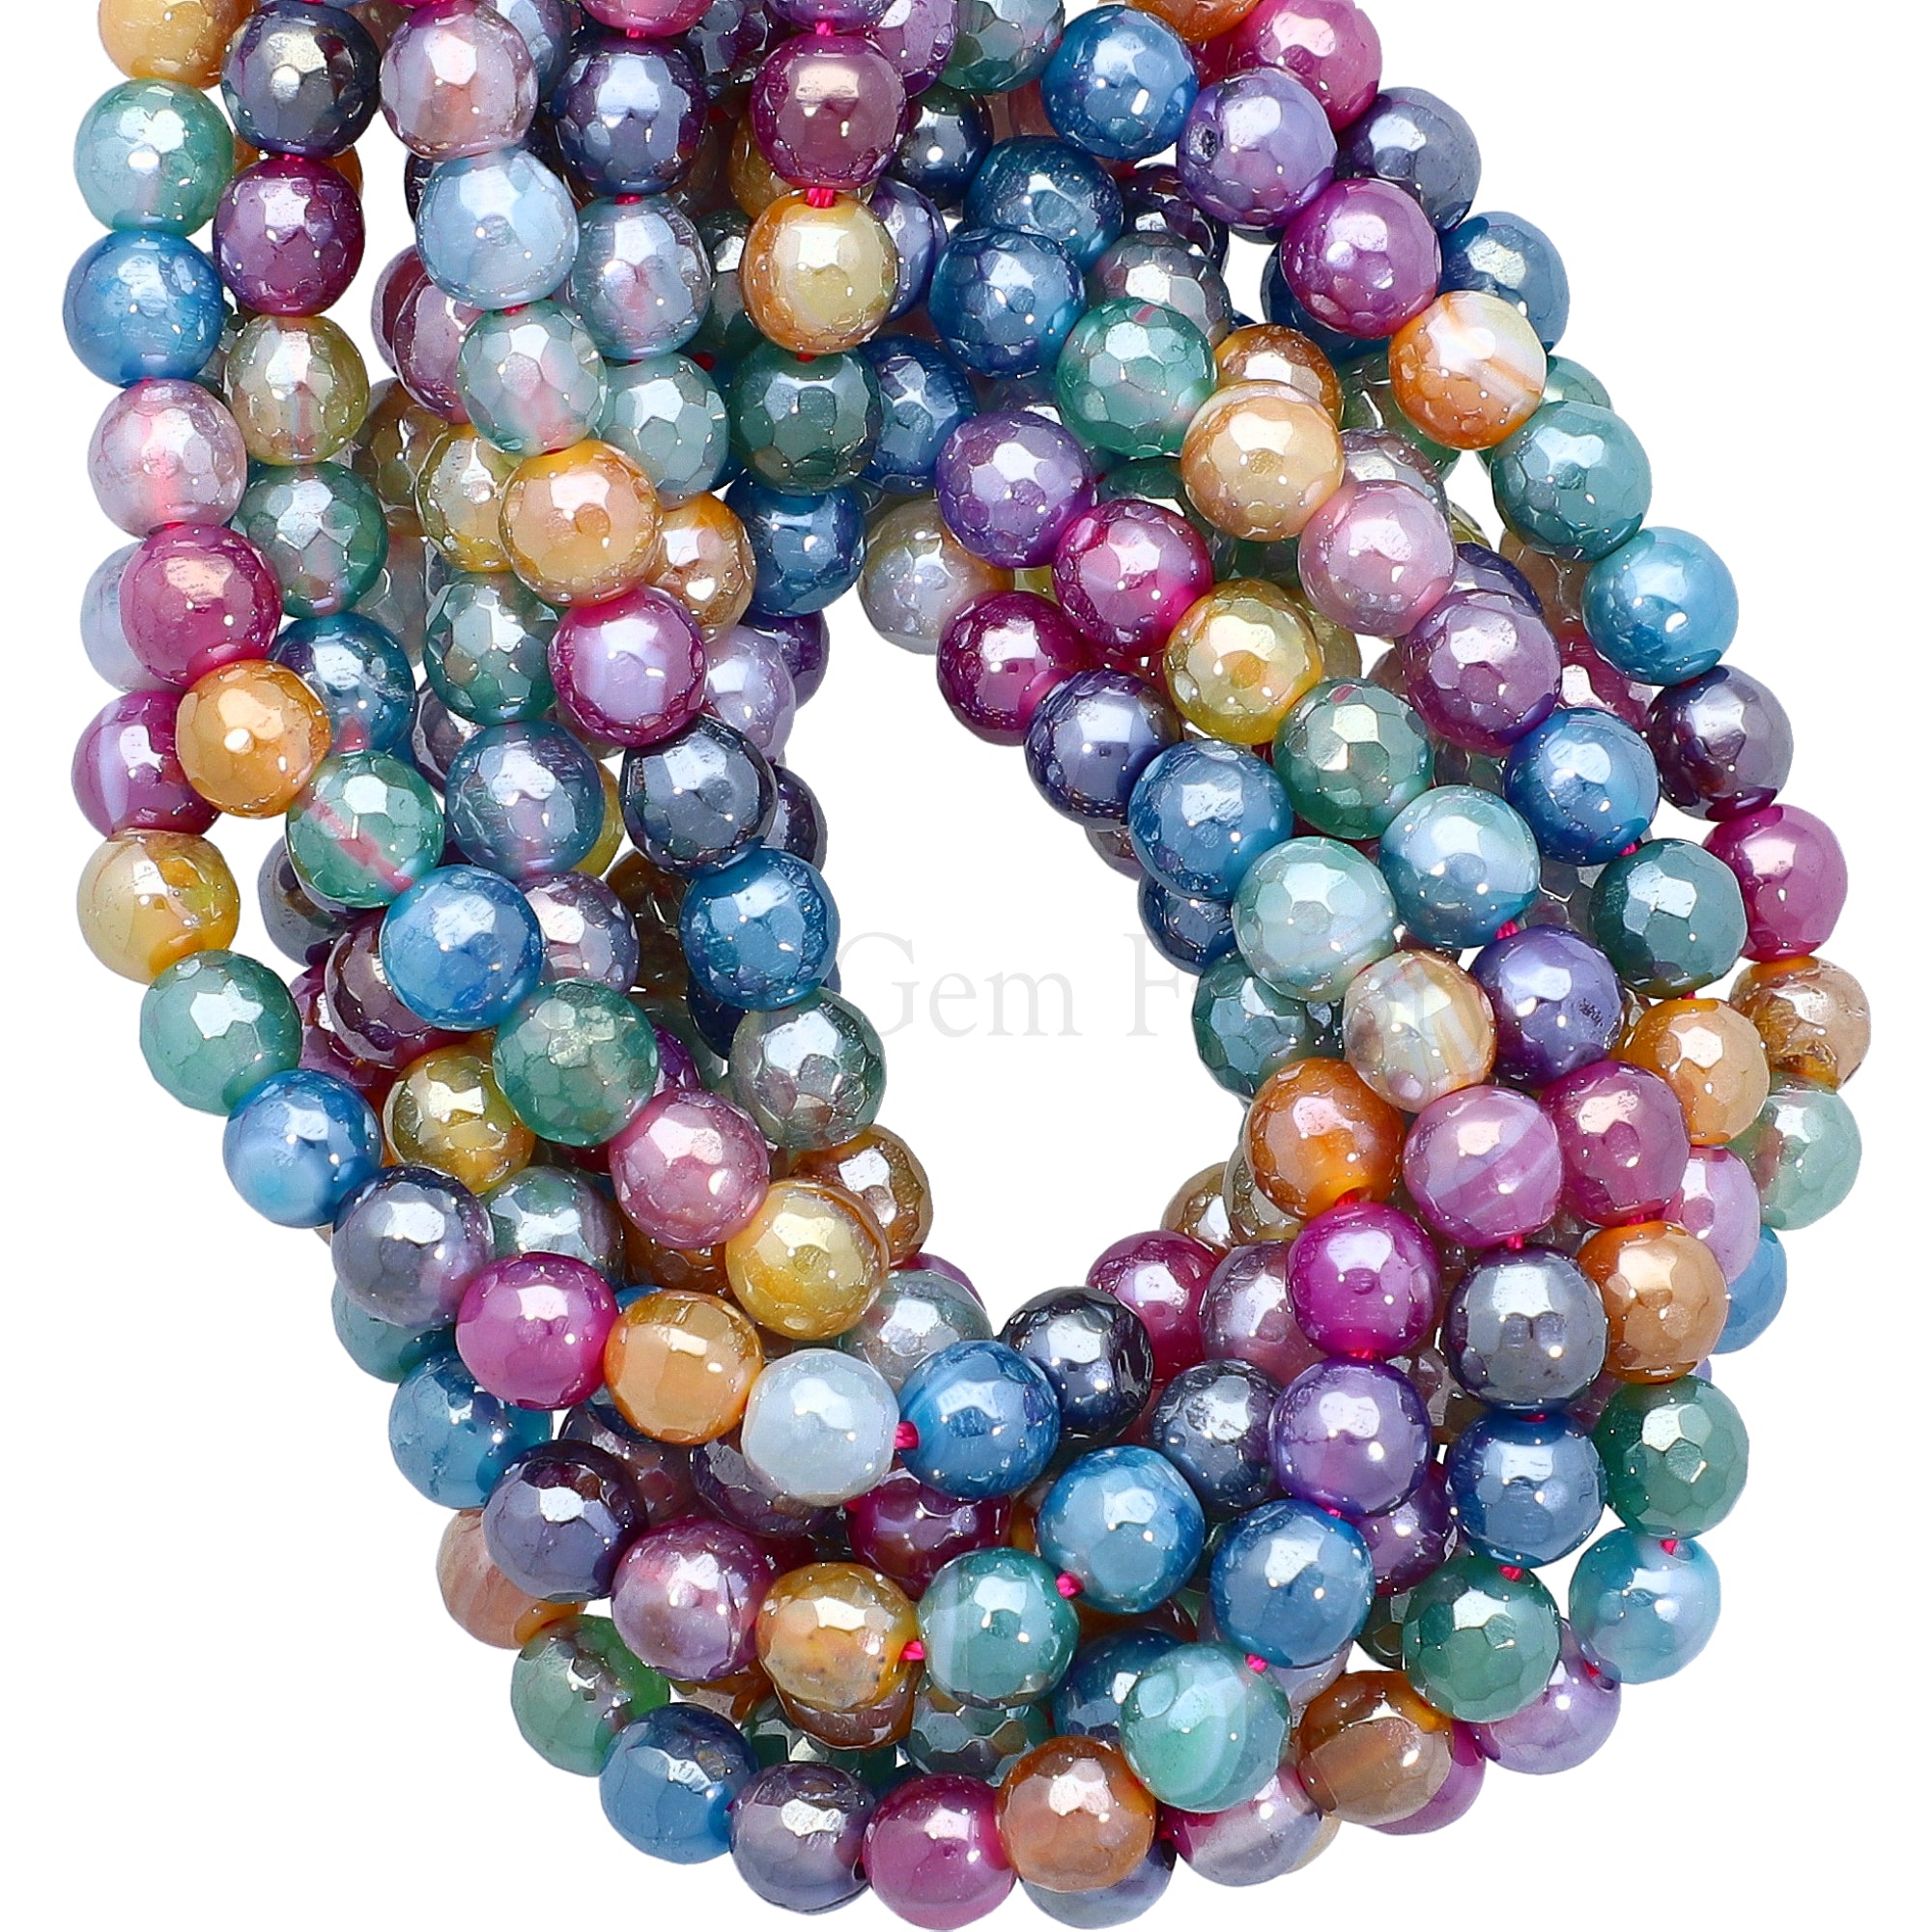 6 MM Mystic Coated Agate Faceted Round Beads 15 Inches Strand